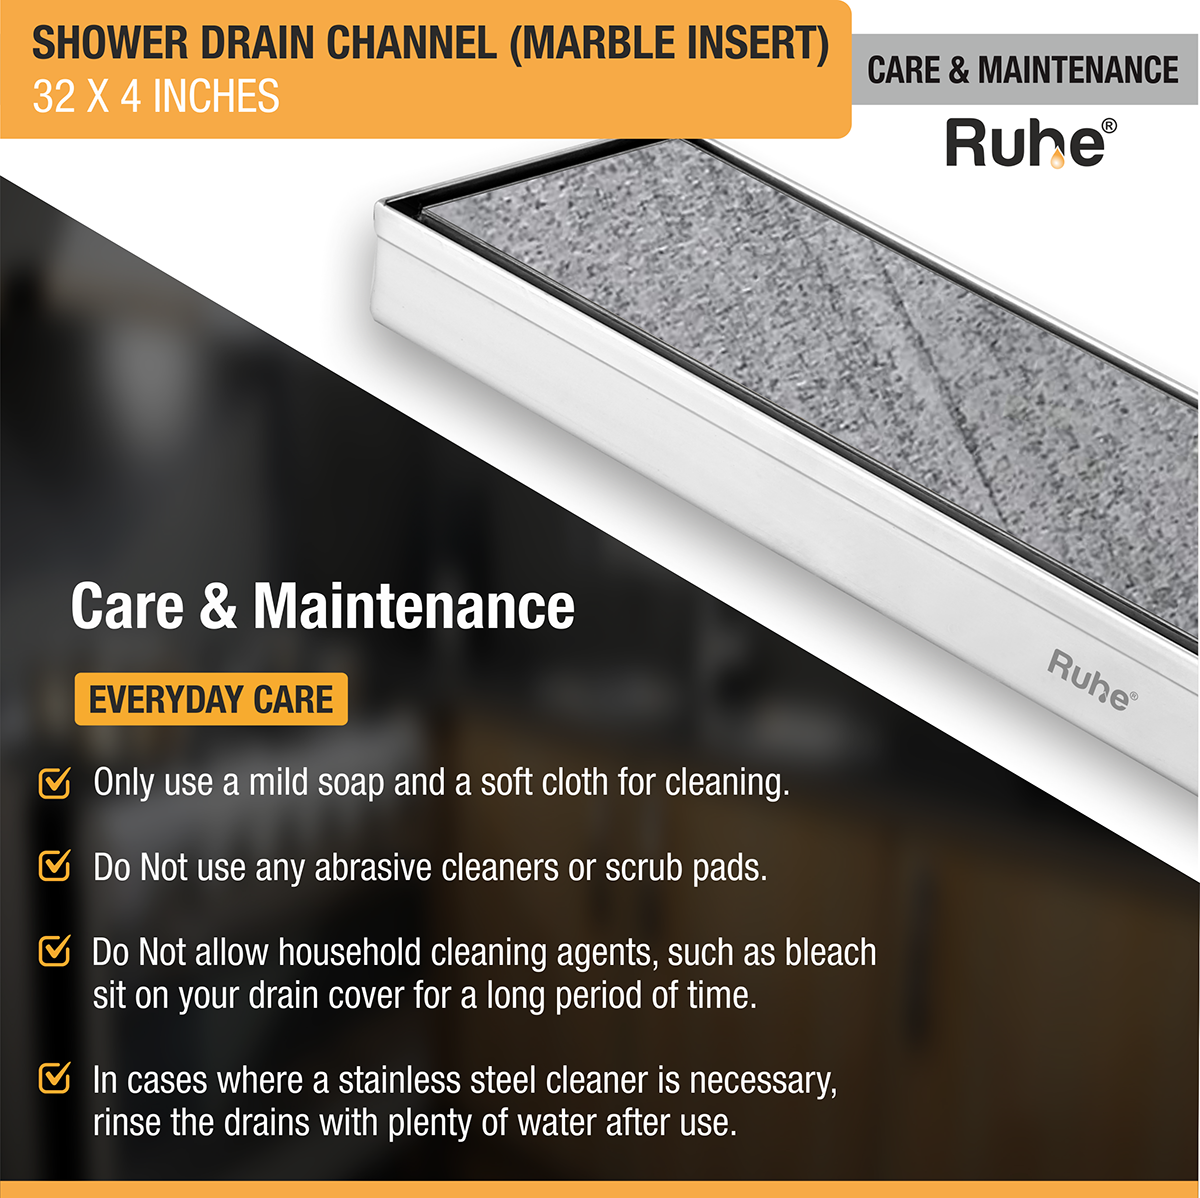 Marble Insert Shower Drain Channel (32 x 4 Inches) with Cockroach Trap (304 Grade) care and maintenance